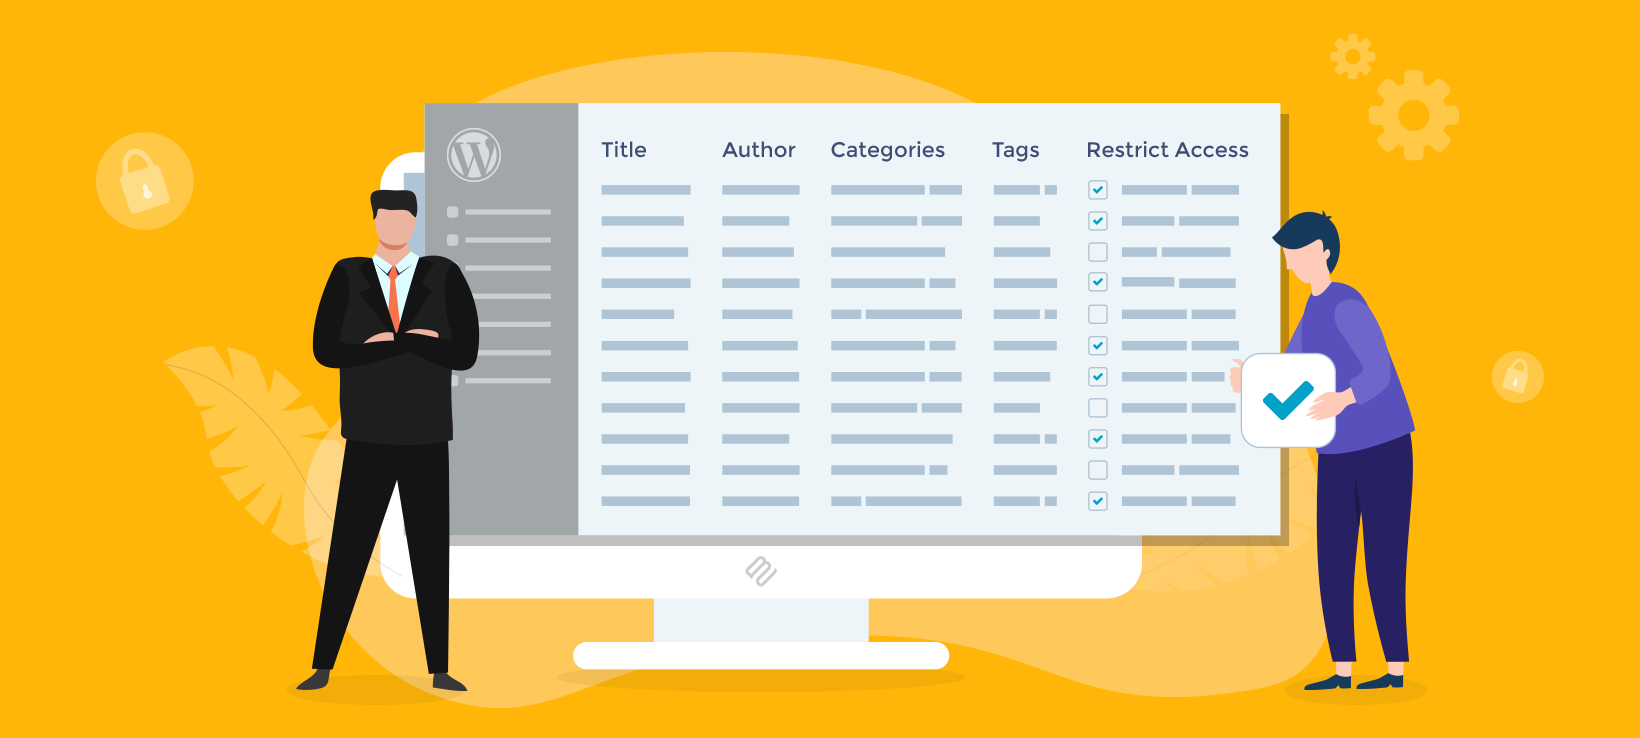 How-to-Use-Categories-and-Tags-for-Pages-in-WordPress-orange-blog-header